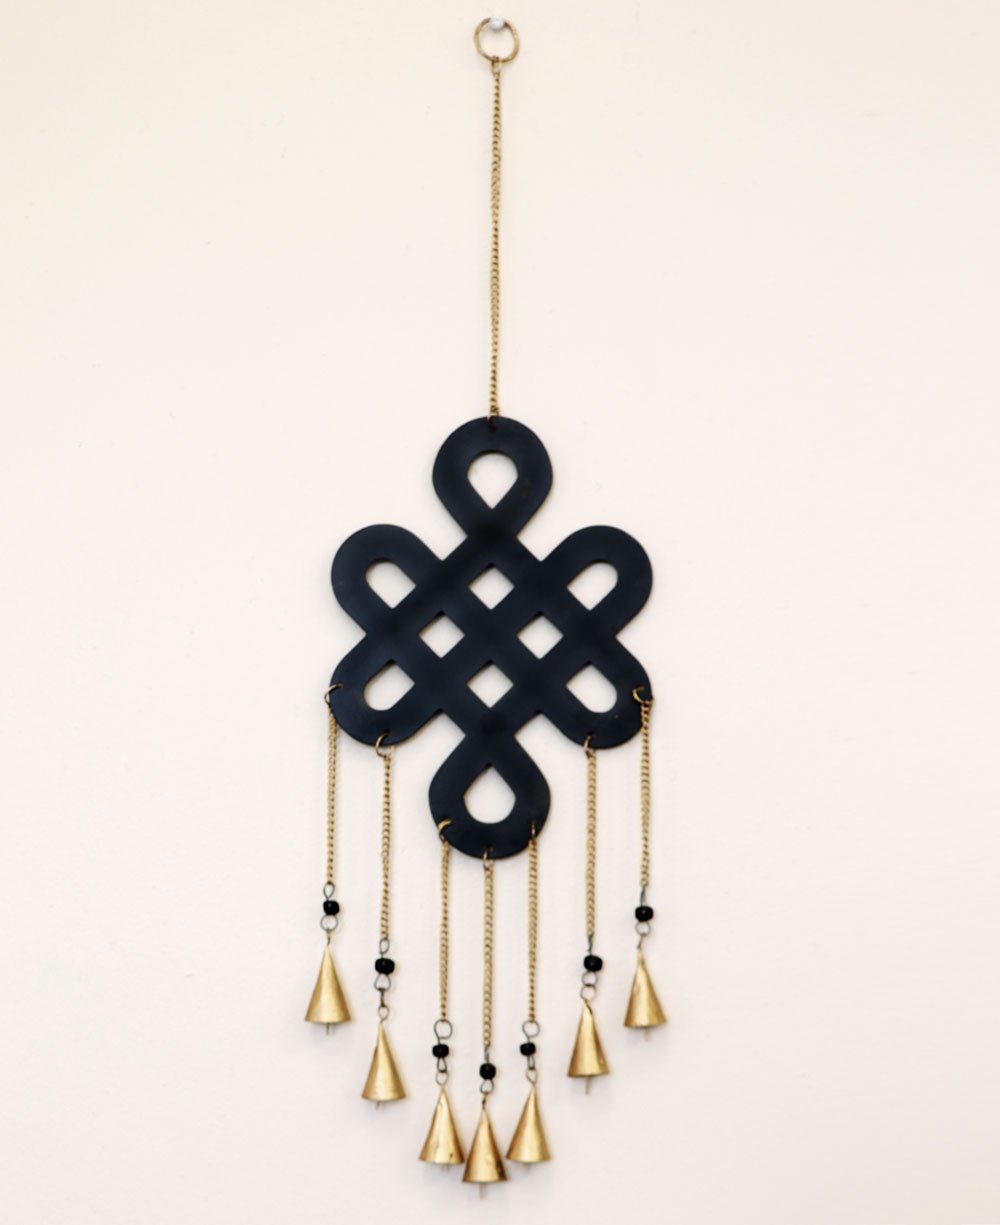 Fairtrade Endless Knot Chime Metal Wall Hanging - Wind Chimes